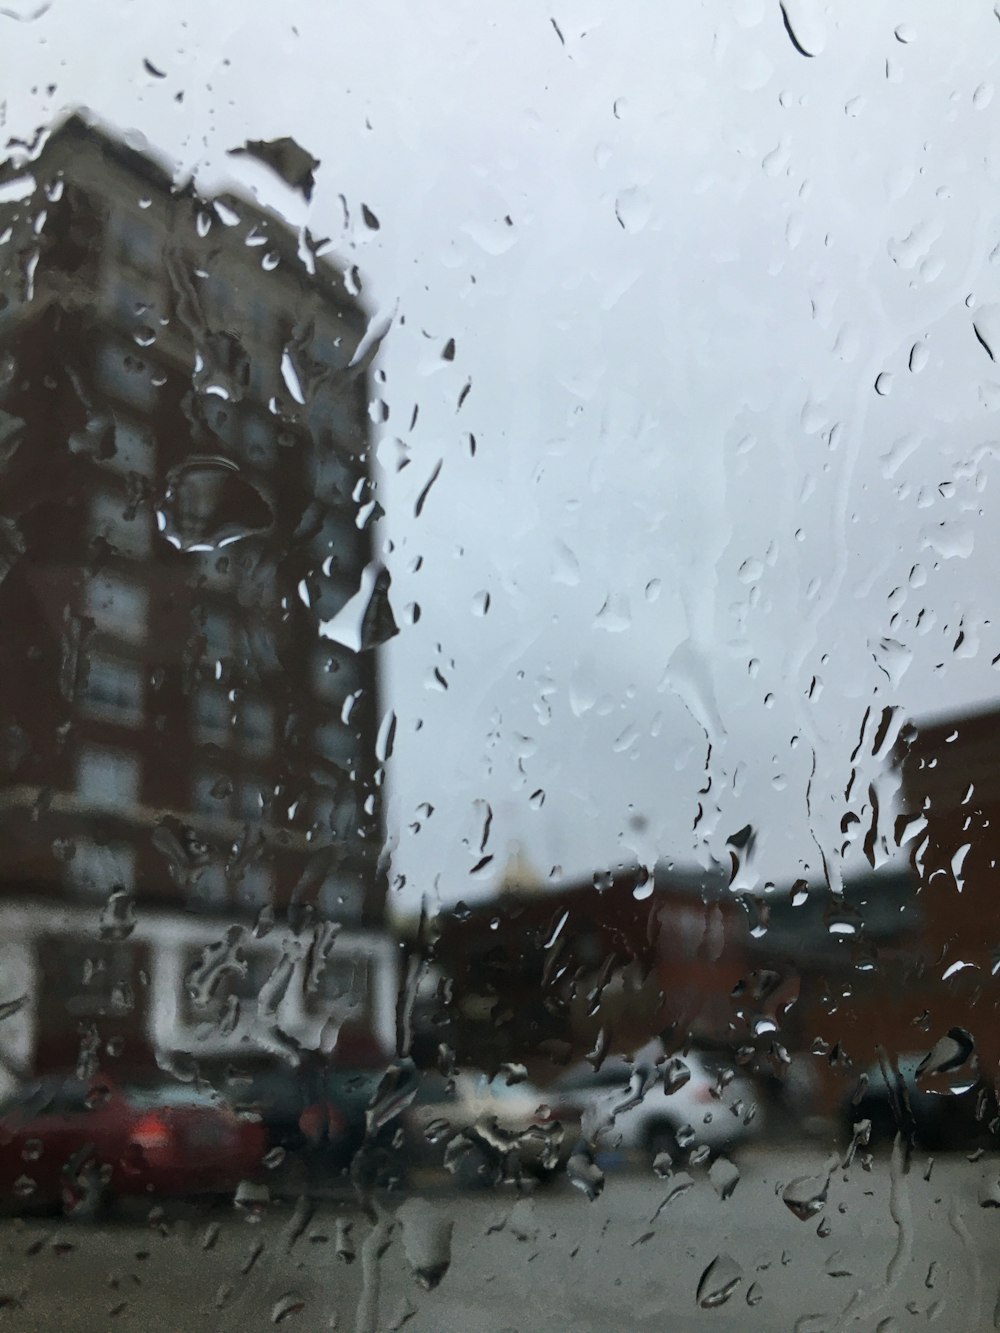 a view of a building through a rain covered window